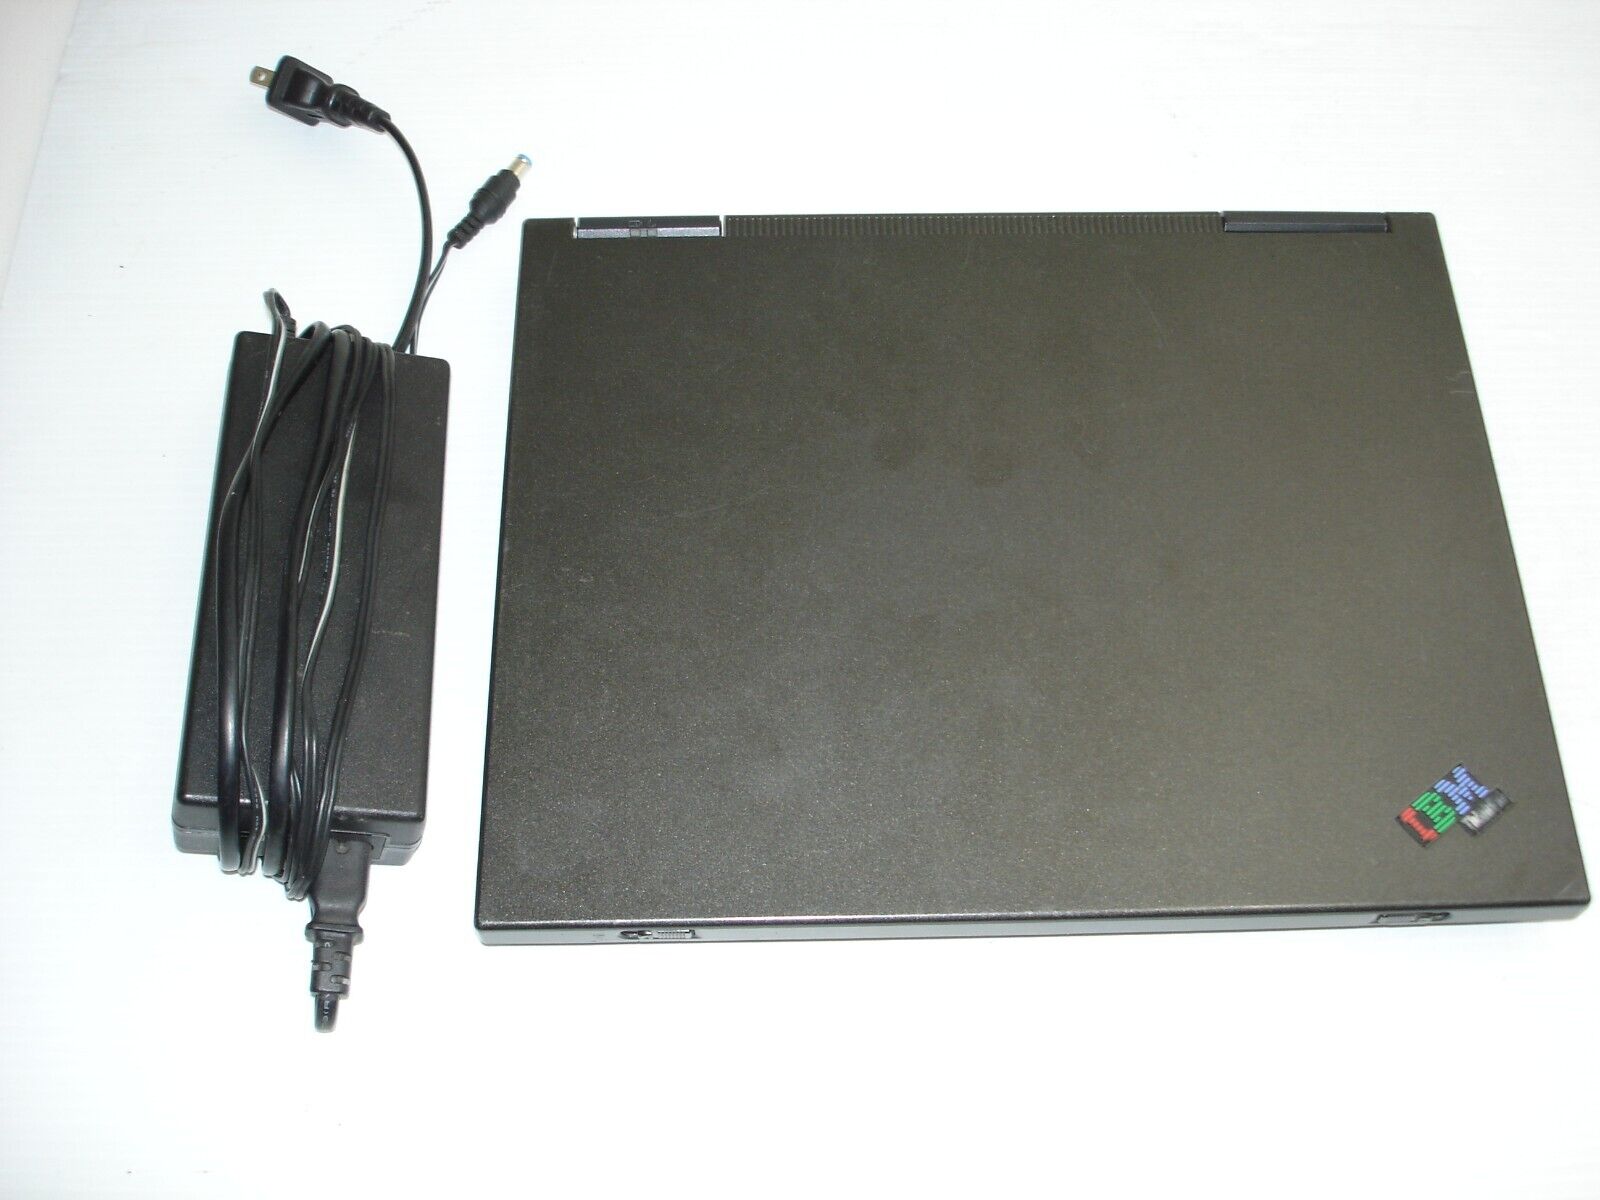 Vintage IBM ThinkPad 570 Laptop Computer TYPE: 2644 with Charger